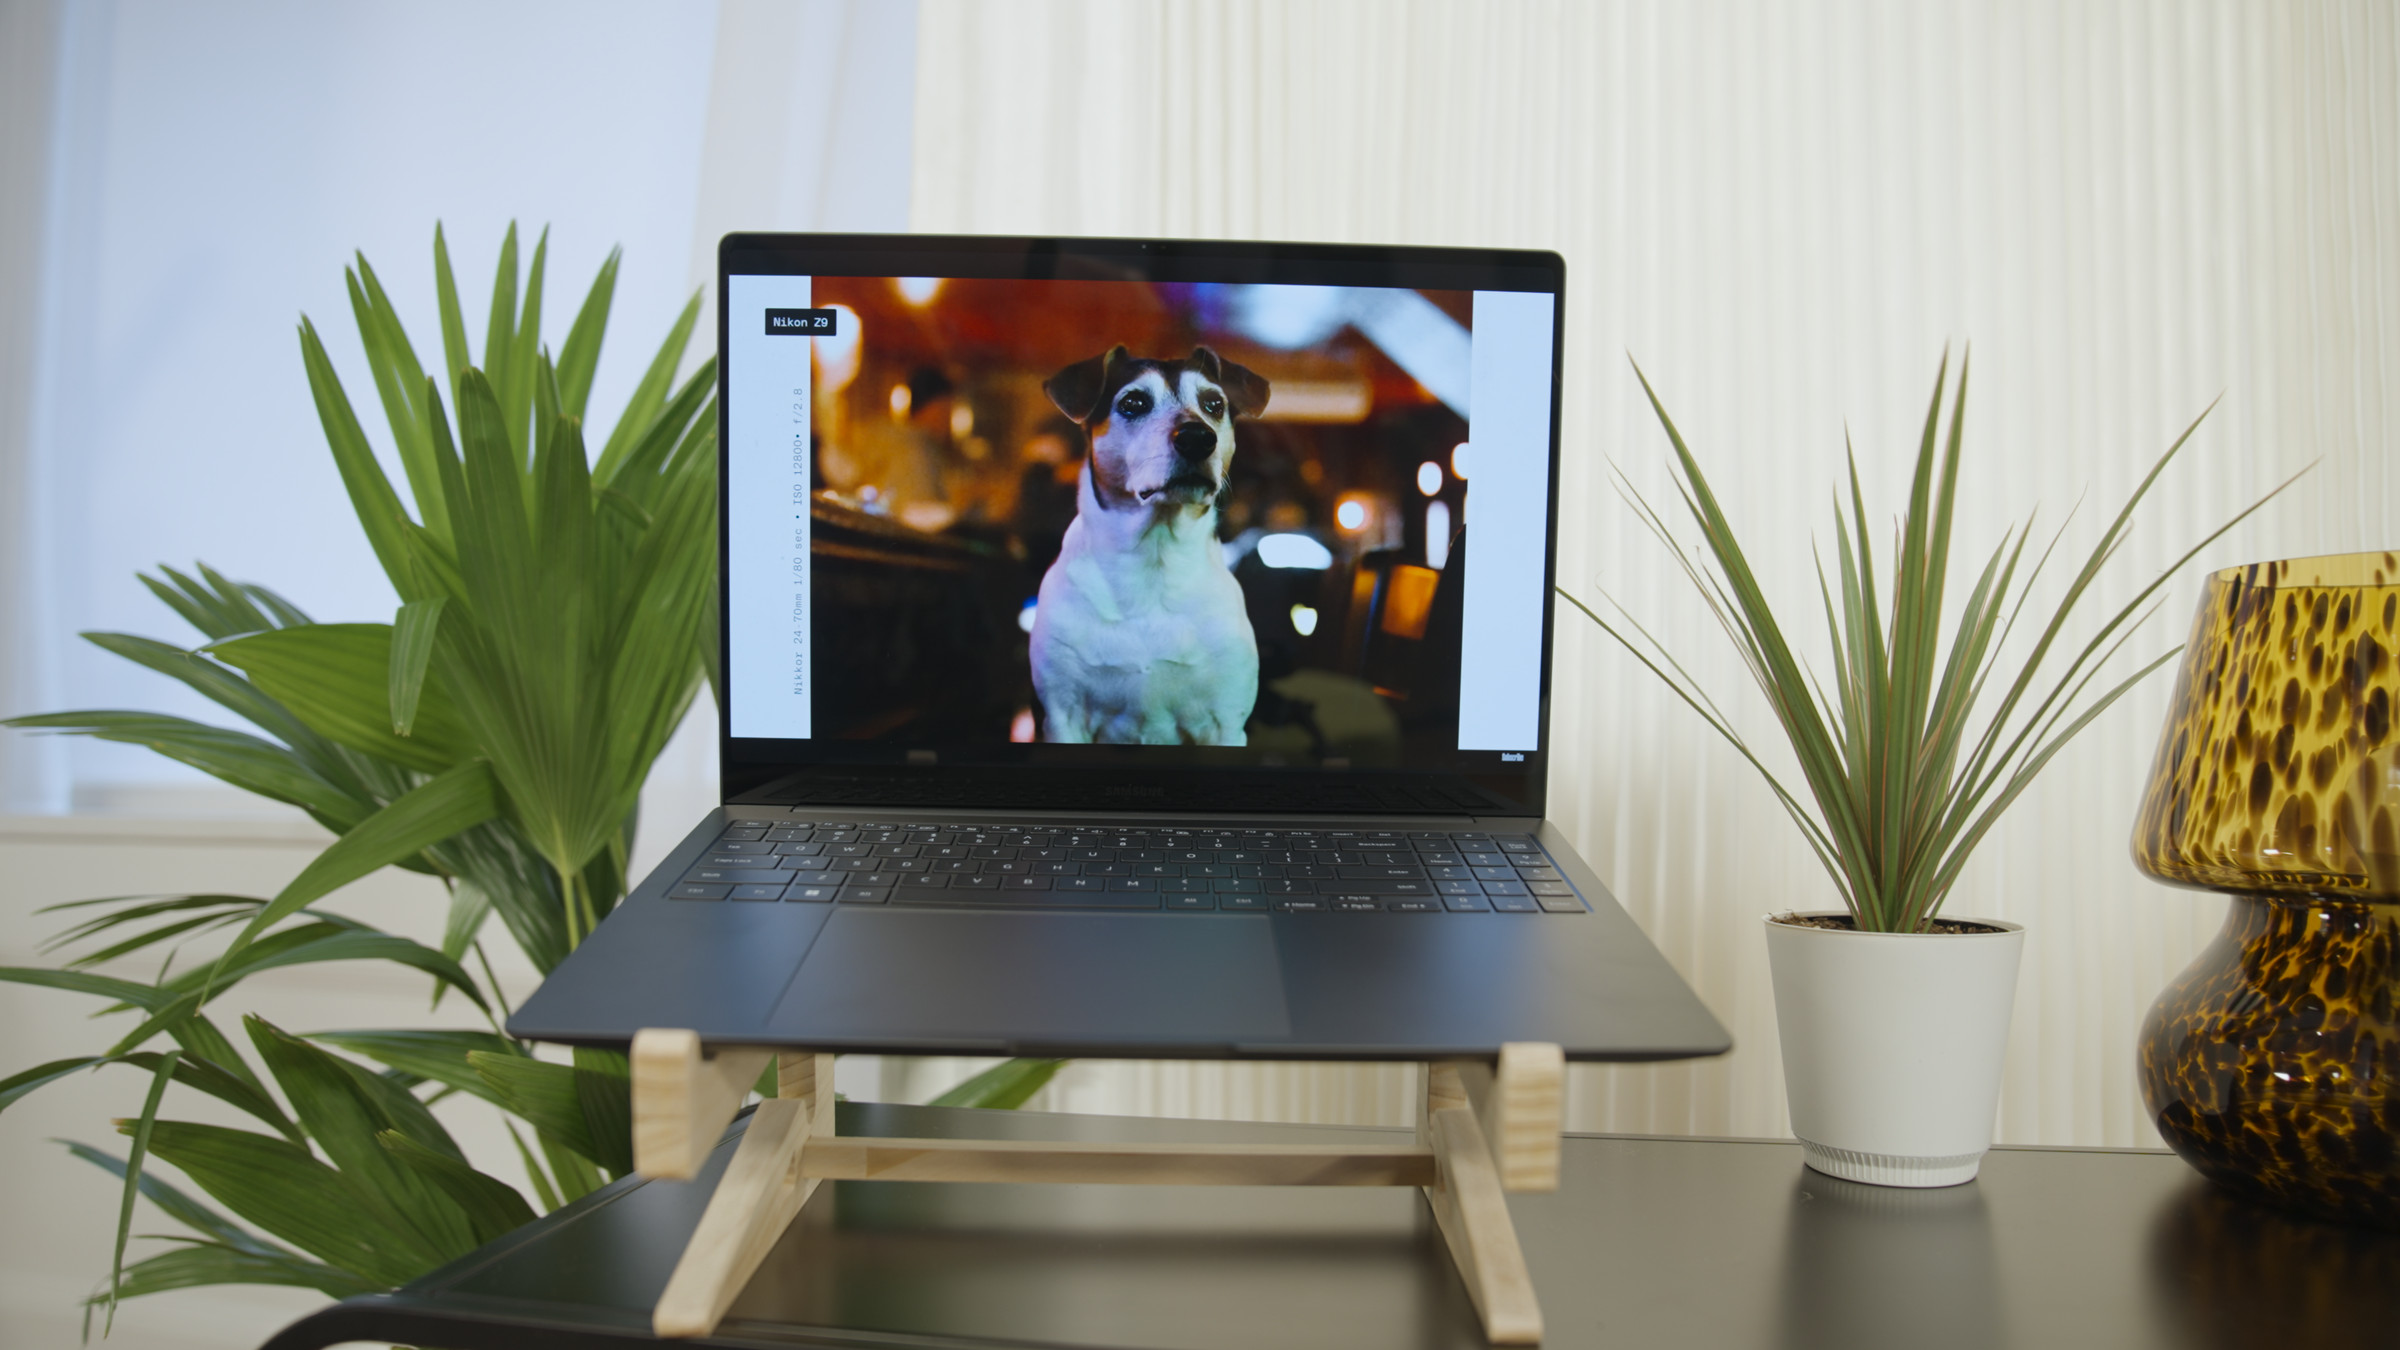 The Samsung Galaxy Book3 Ultra seen from the front with houseplants on either side. The screen displays a picture of a dog.